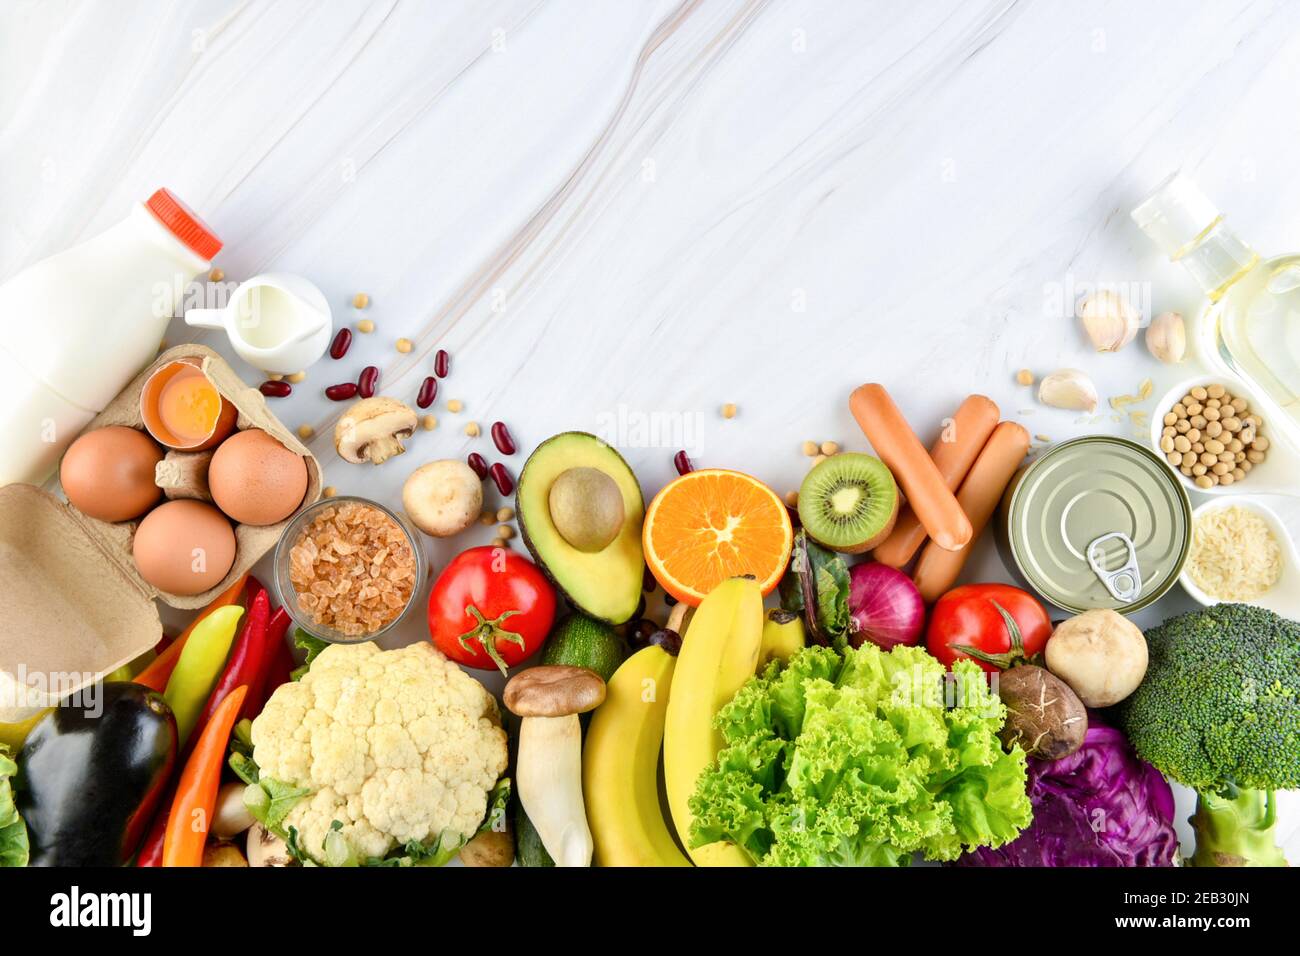 Top view of mixed  healthy food ingredients including colorful vegetables and fruits on marble kitchen countertop background Stock Photo